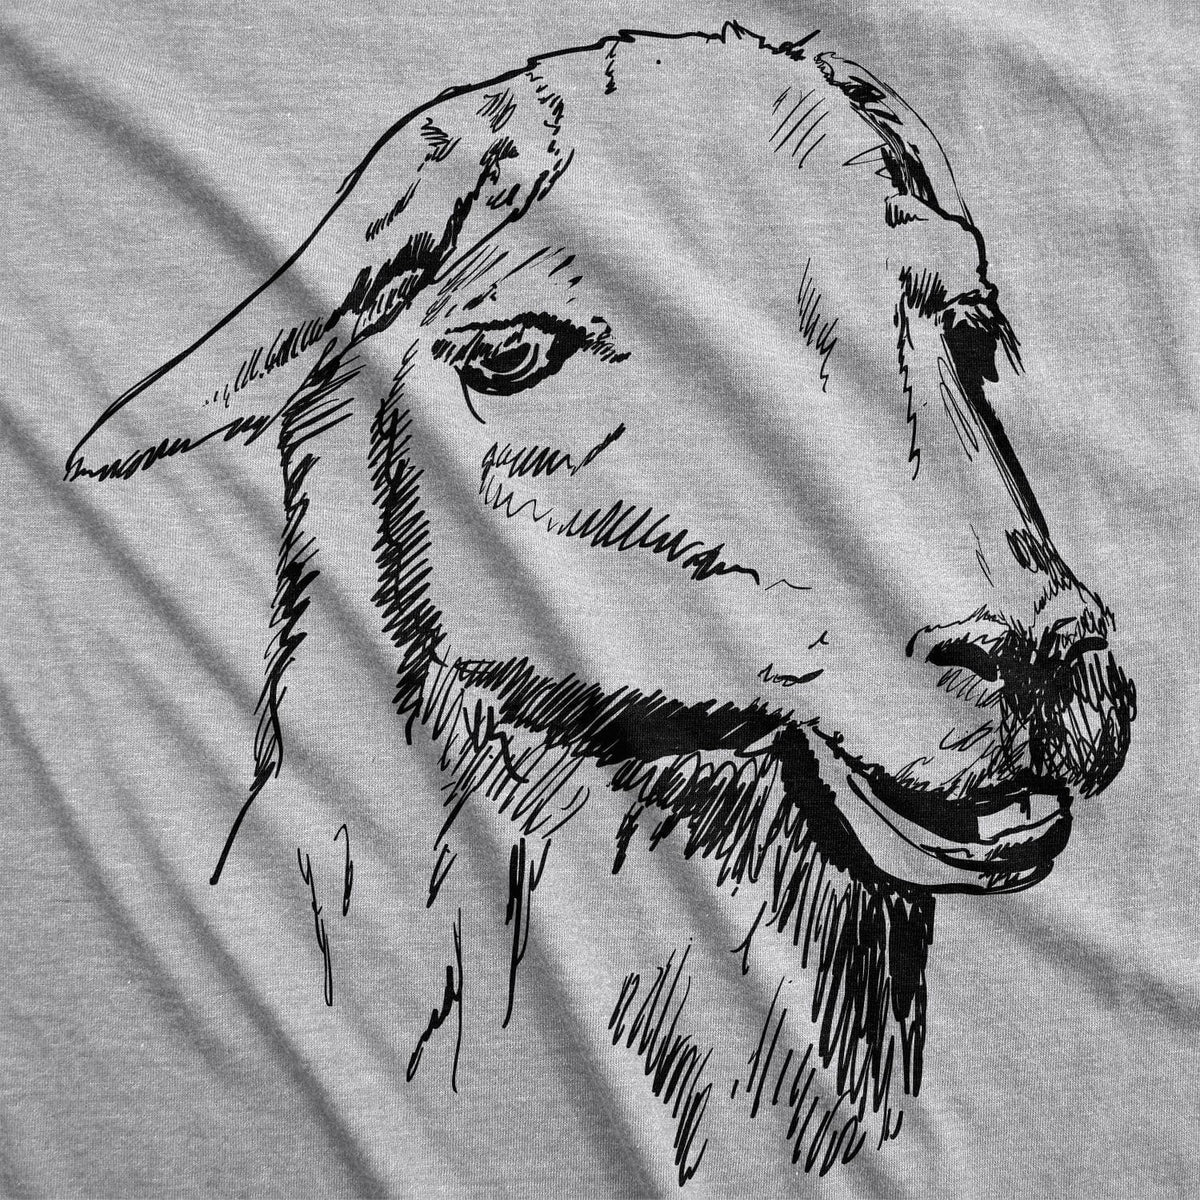 Ask Me About My Llama Women&#39;s Tshirt  -  Crazy Dog T-Shirts